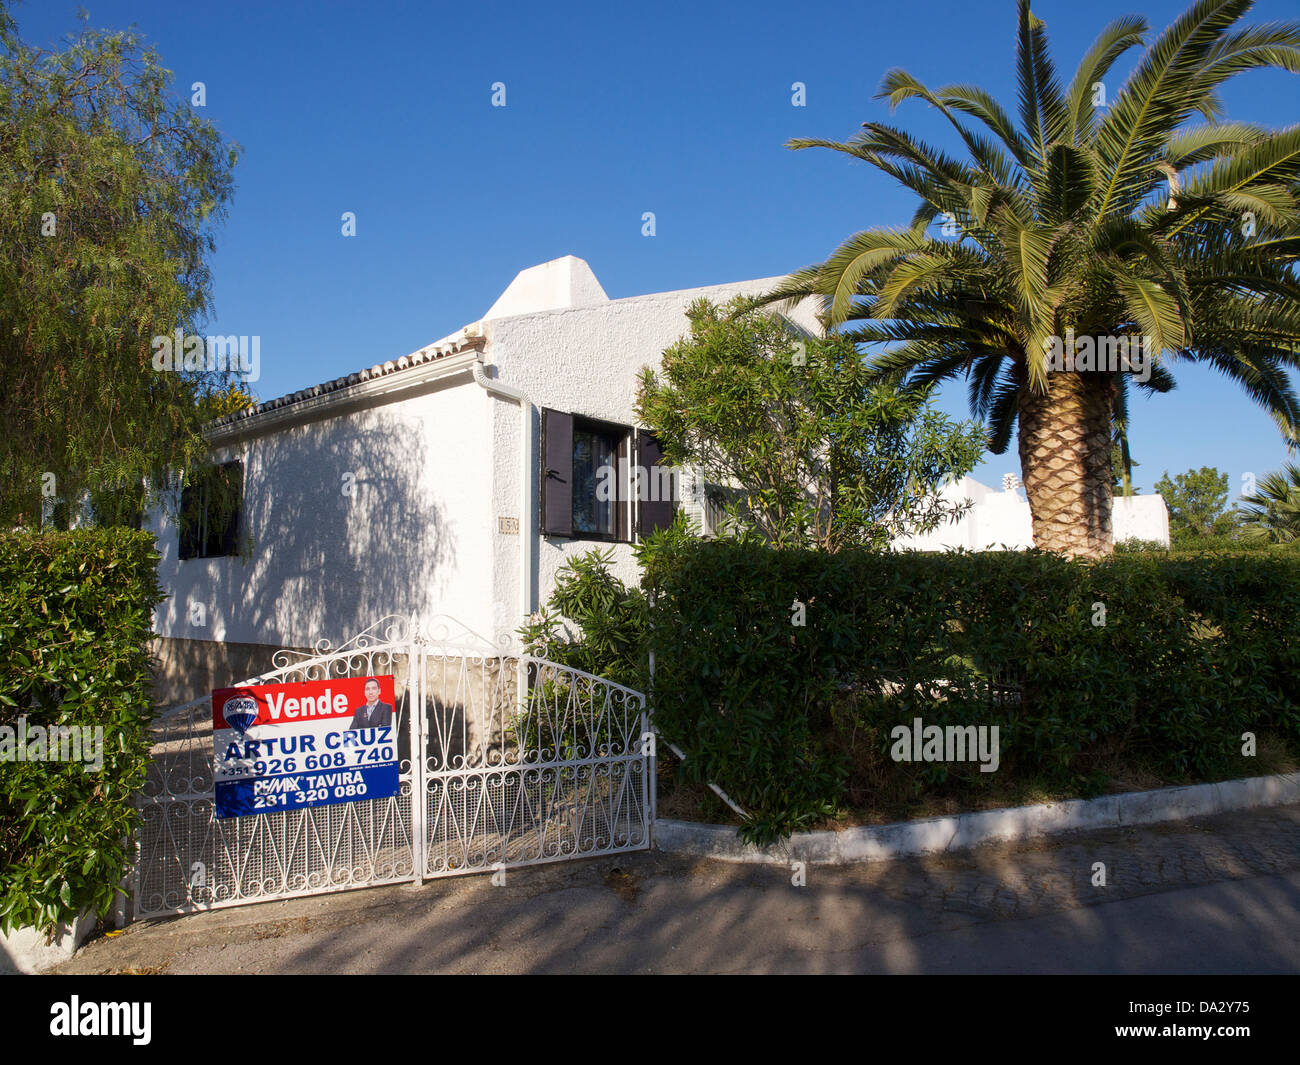 One of the many holiday homes for sale in the Algarve. Cabanas de Tavira, Portugal Stock Photo